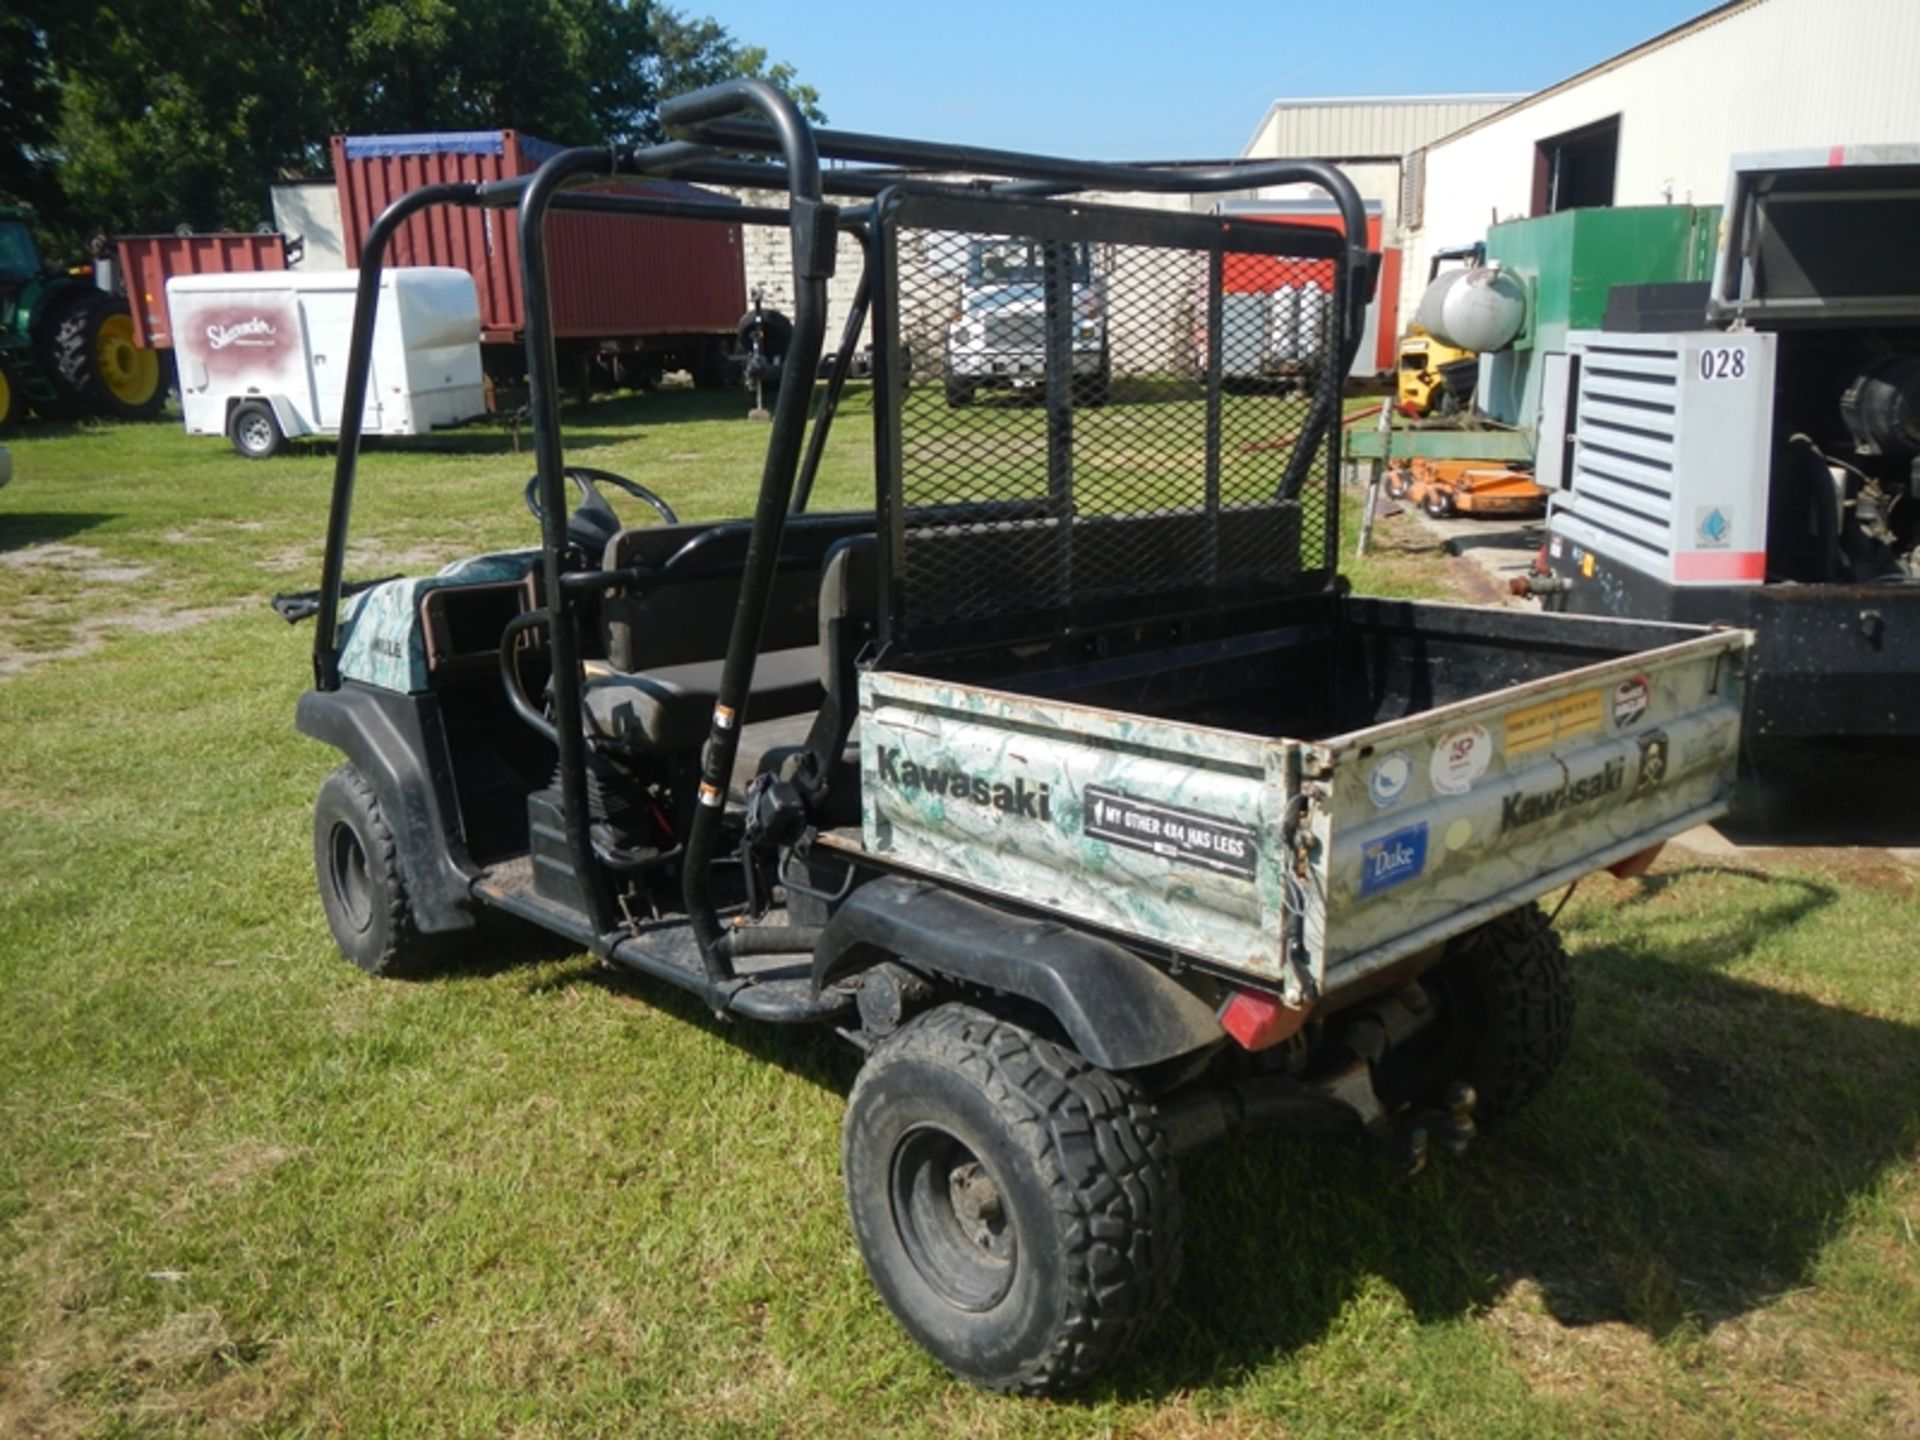 KAWASAKI Mule 3110 2-row seating w/dump body (has cooling system issues water will air lock and - Image 4 of 4